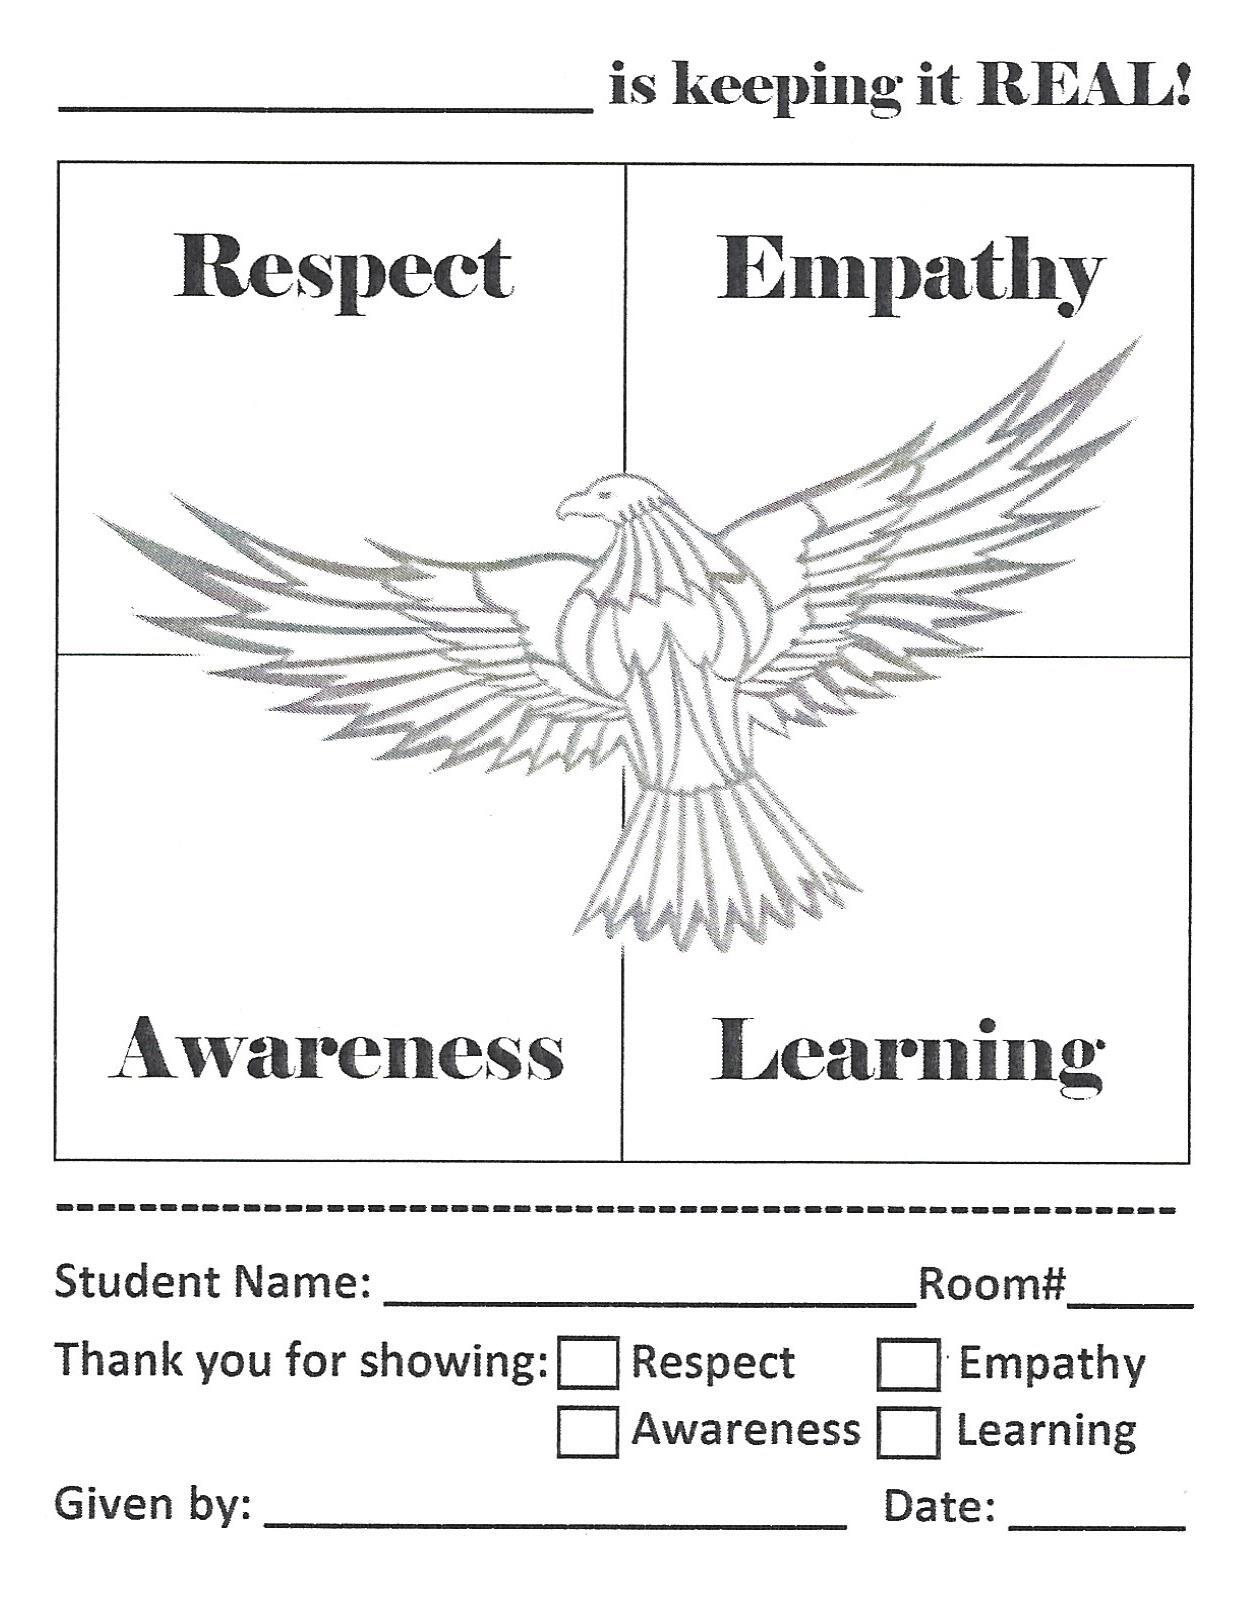 A Keep It Real Slip; Respect, Empathy, Awareness, Learning